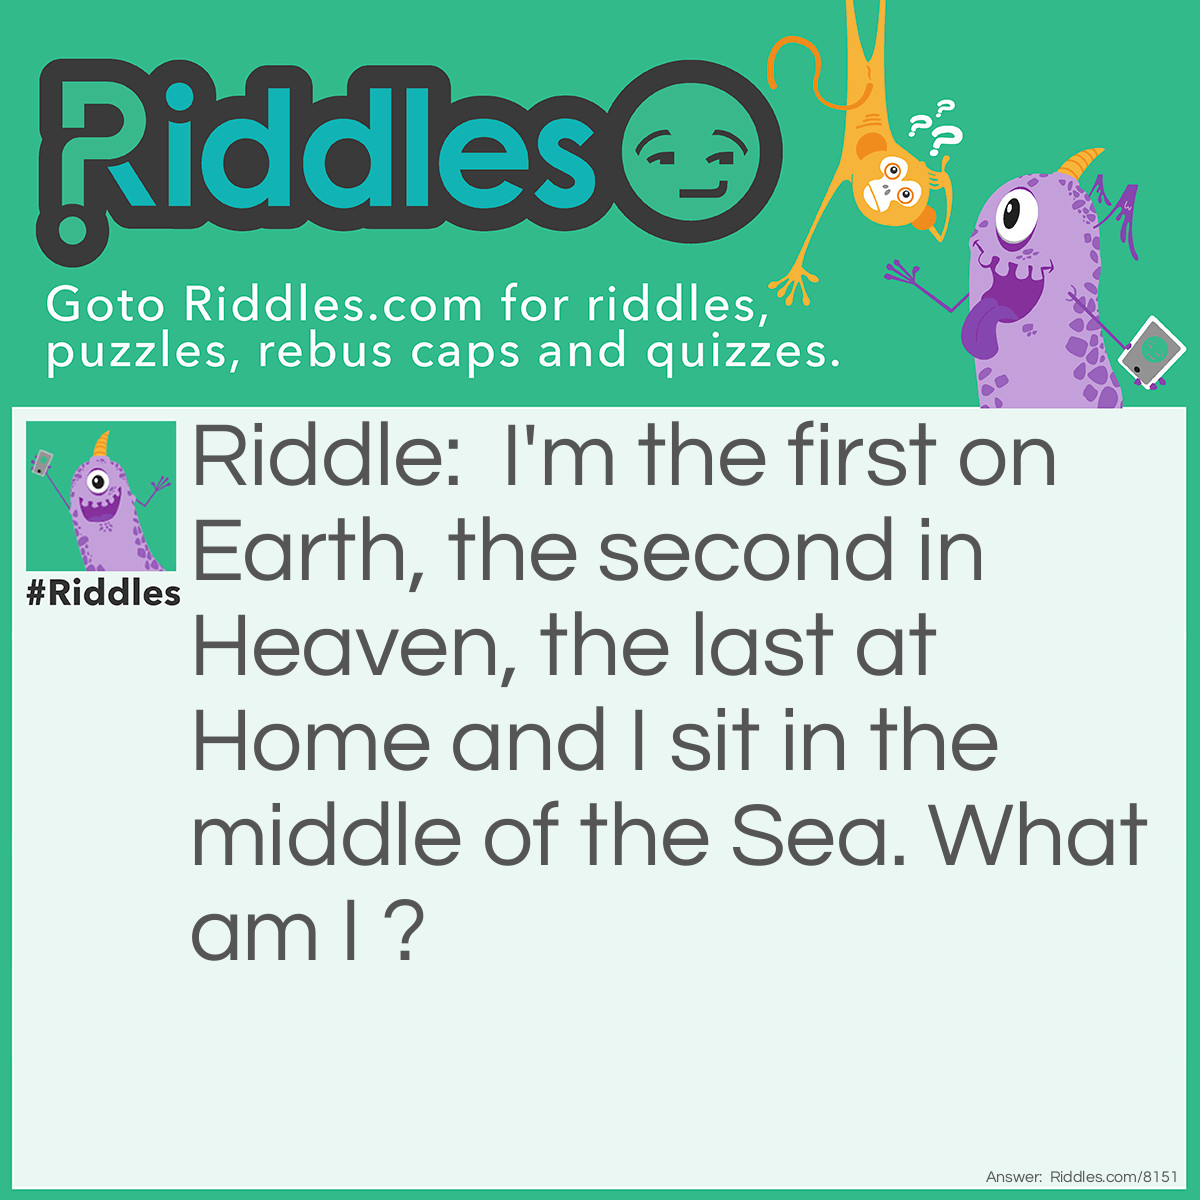 Riddle: I'm the first on Earth, the second in Heaven, the last at Home and I sit in the middle of the Sea. What am I ? Answer: The Letter E.